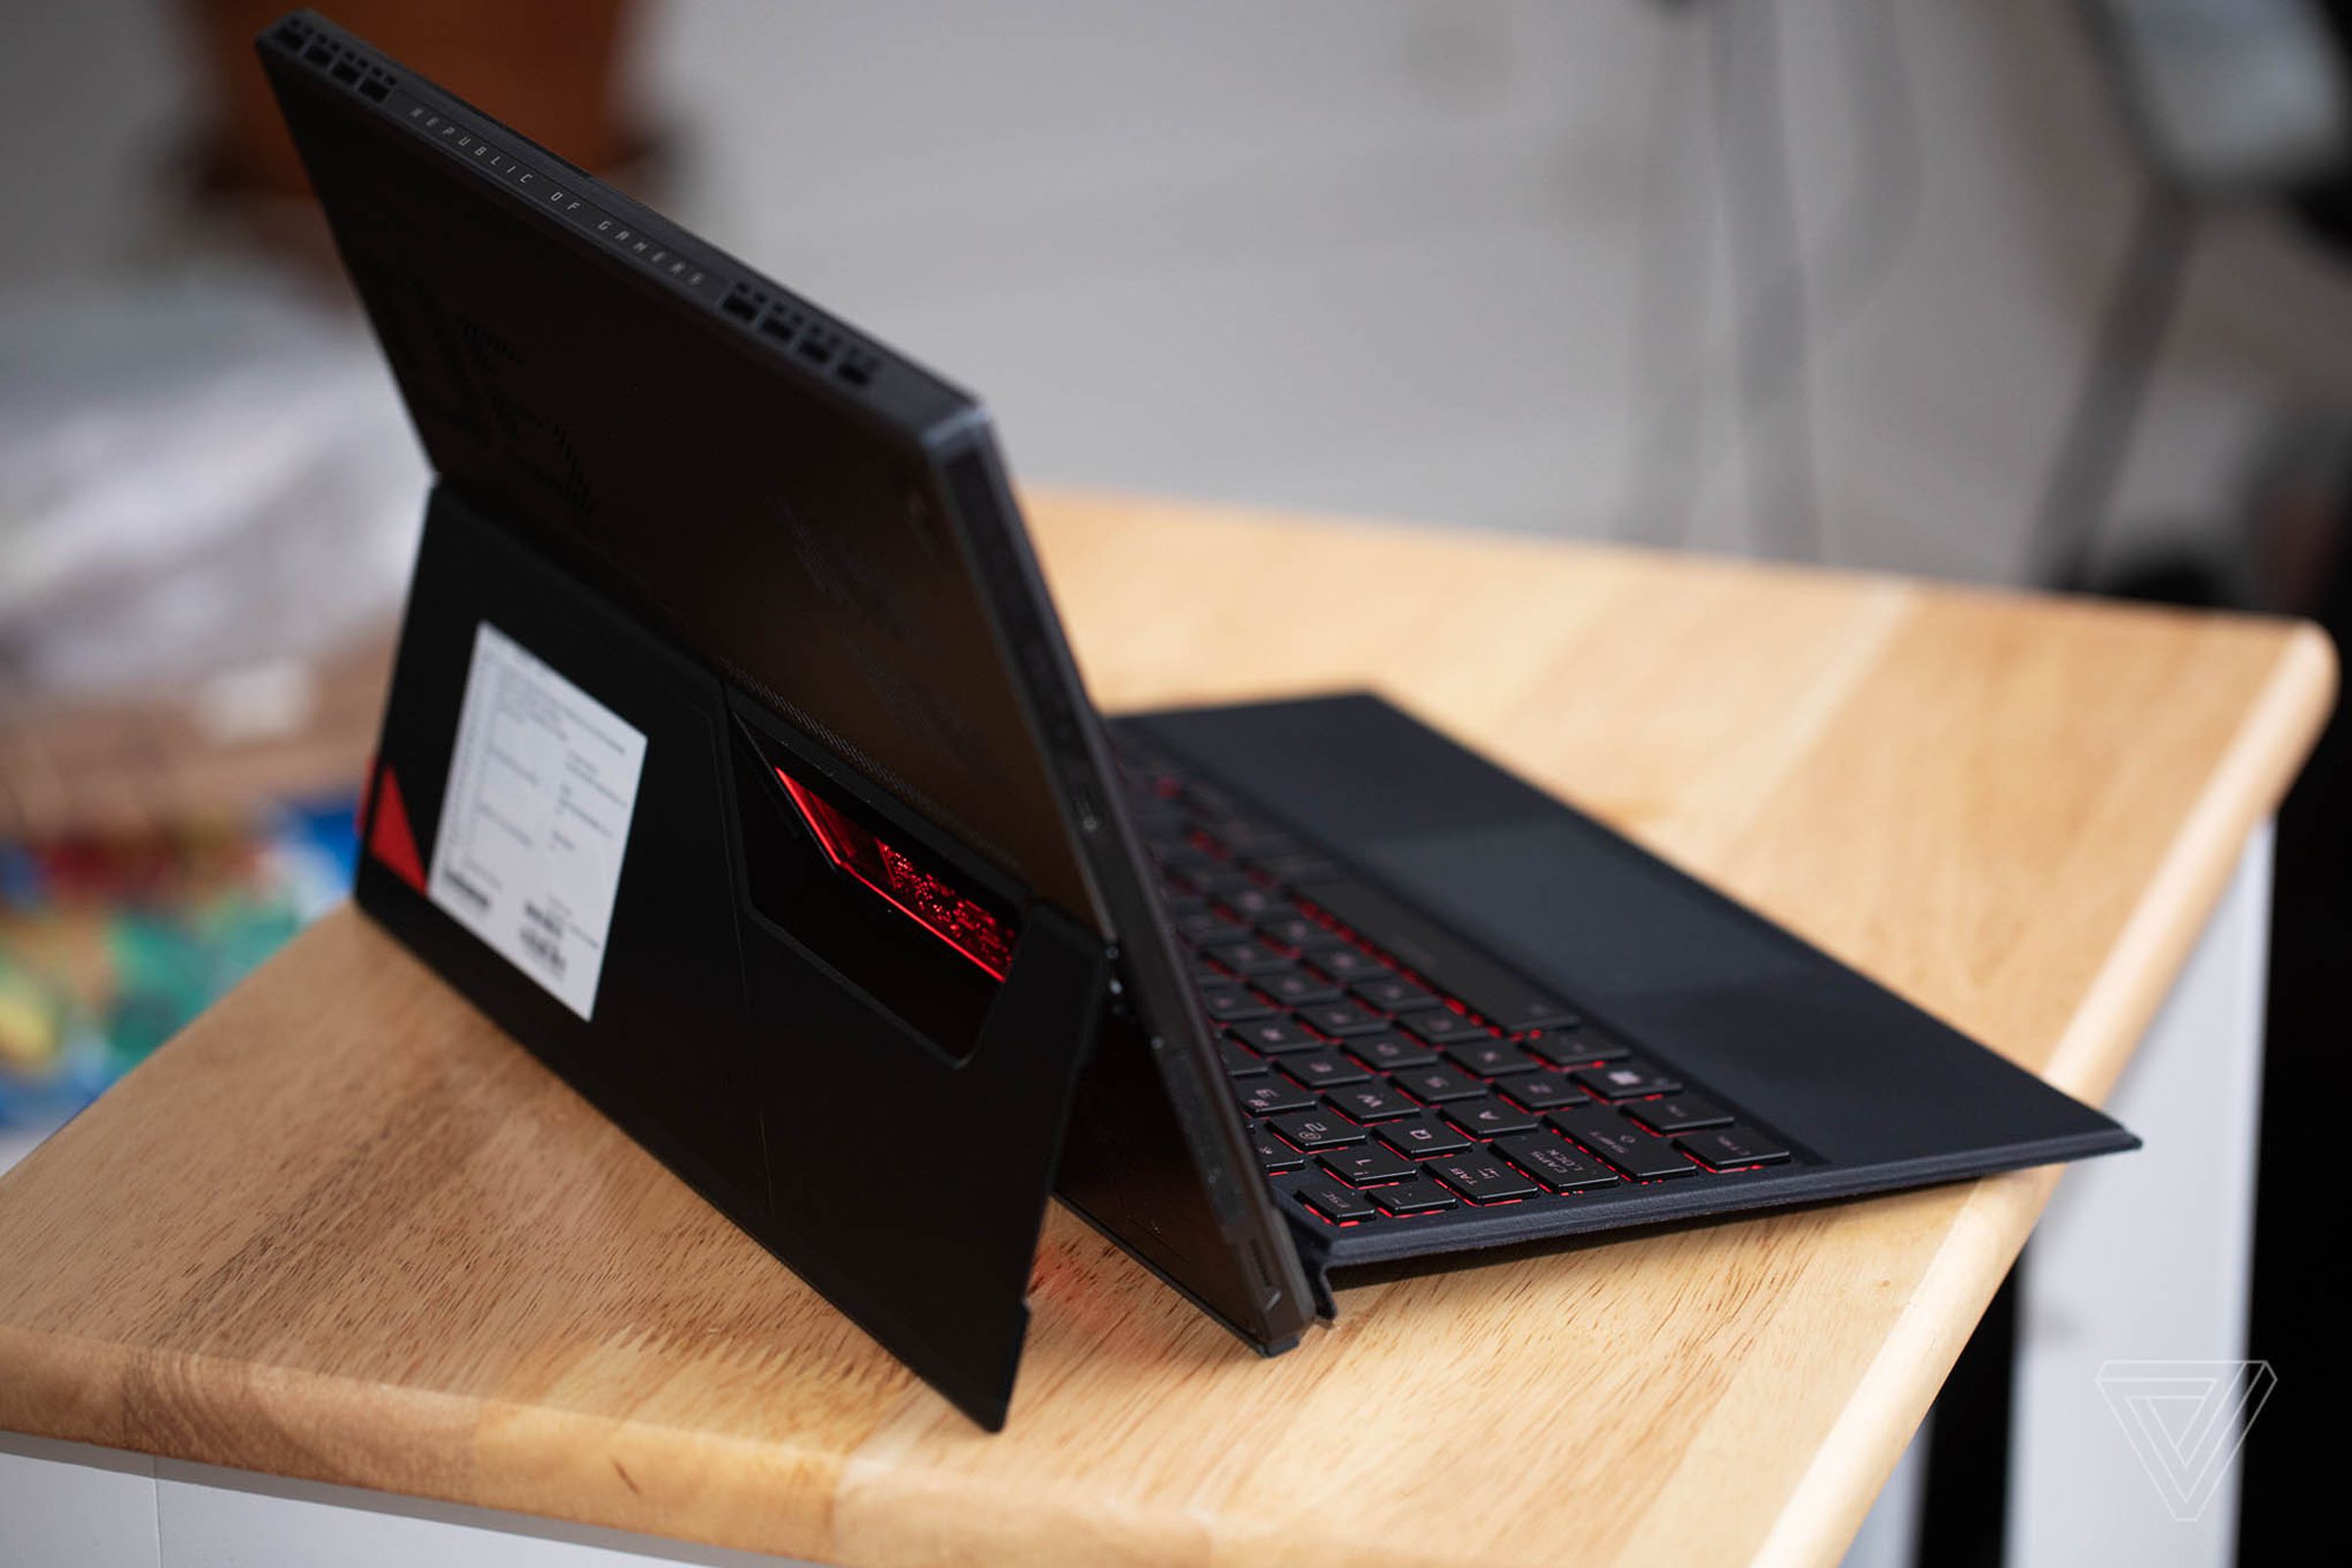 The Asus ROG Flow Z13 in laptop mode seen from the back with the kickstand out.